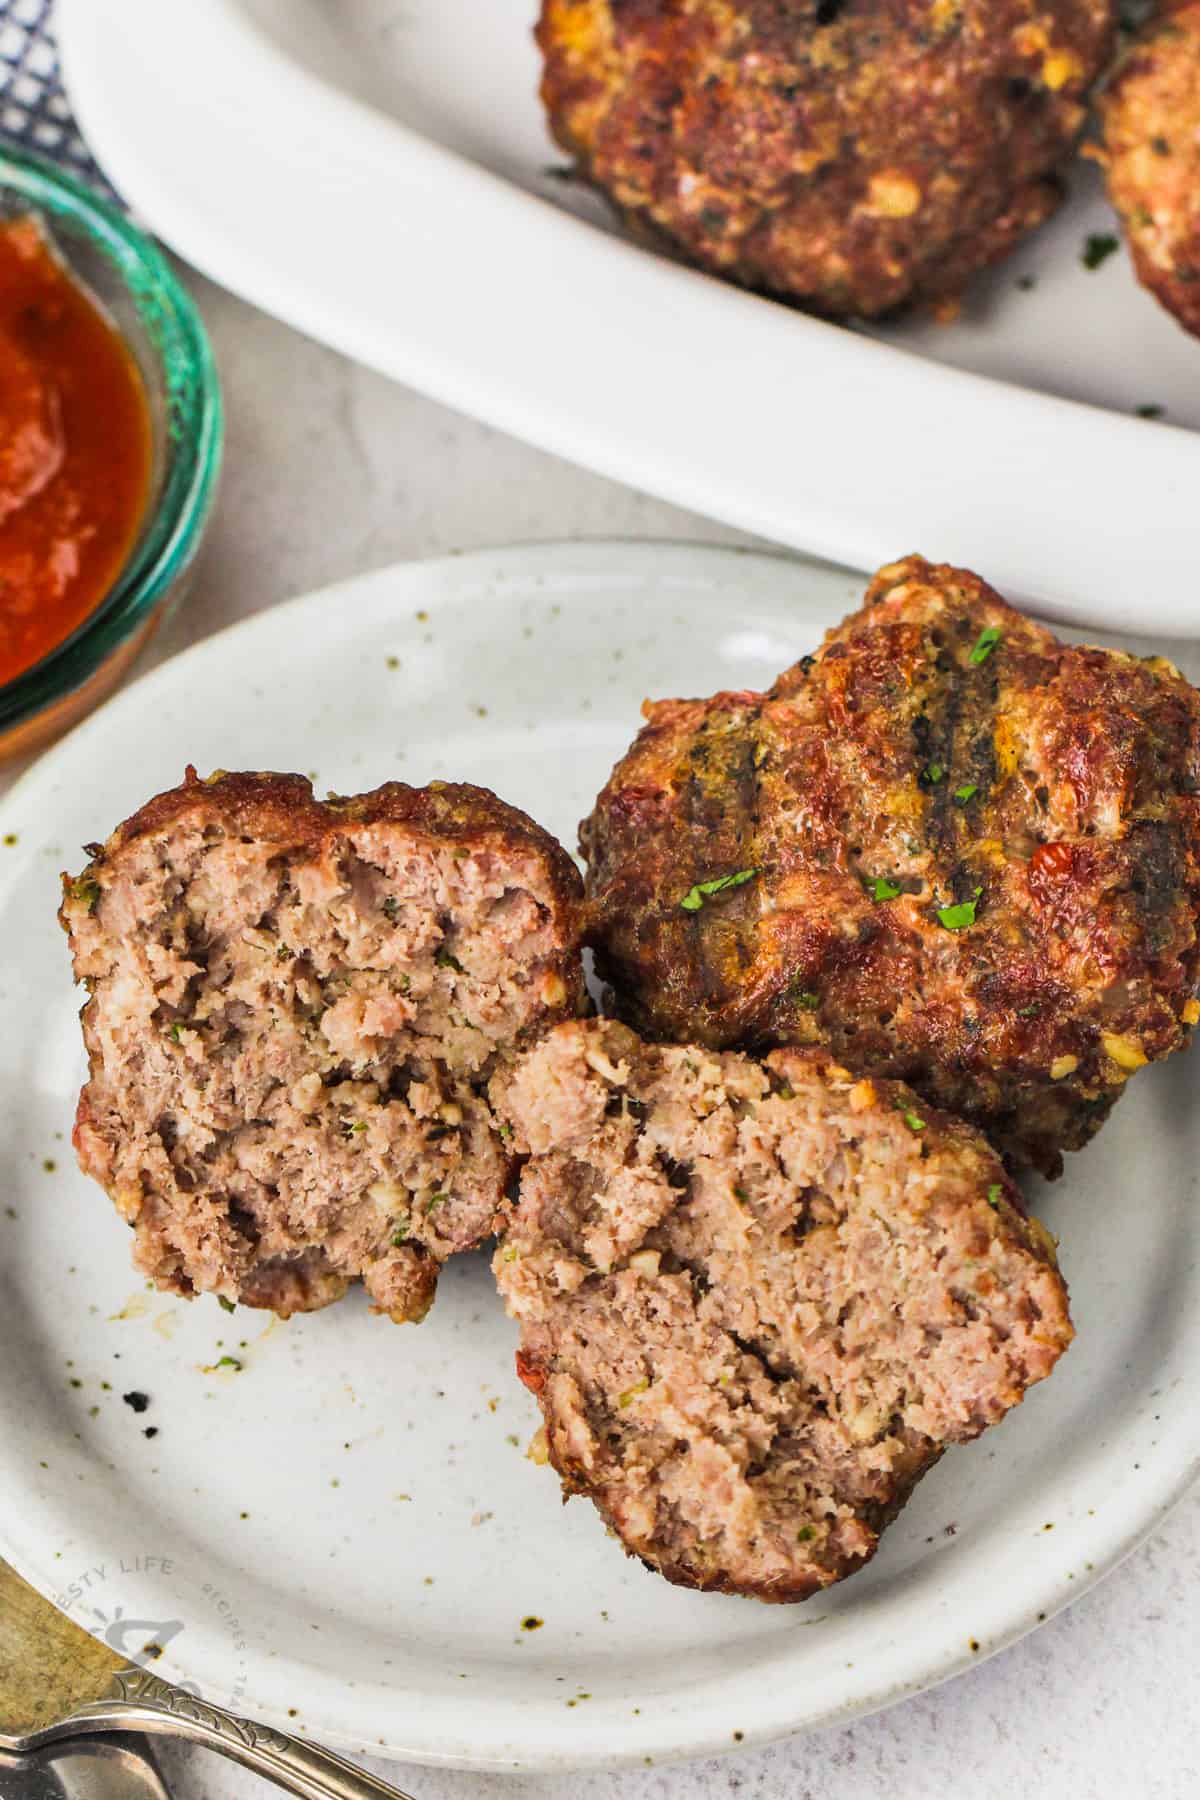 plated Smoked Meatballs with one in half to show middle